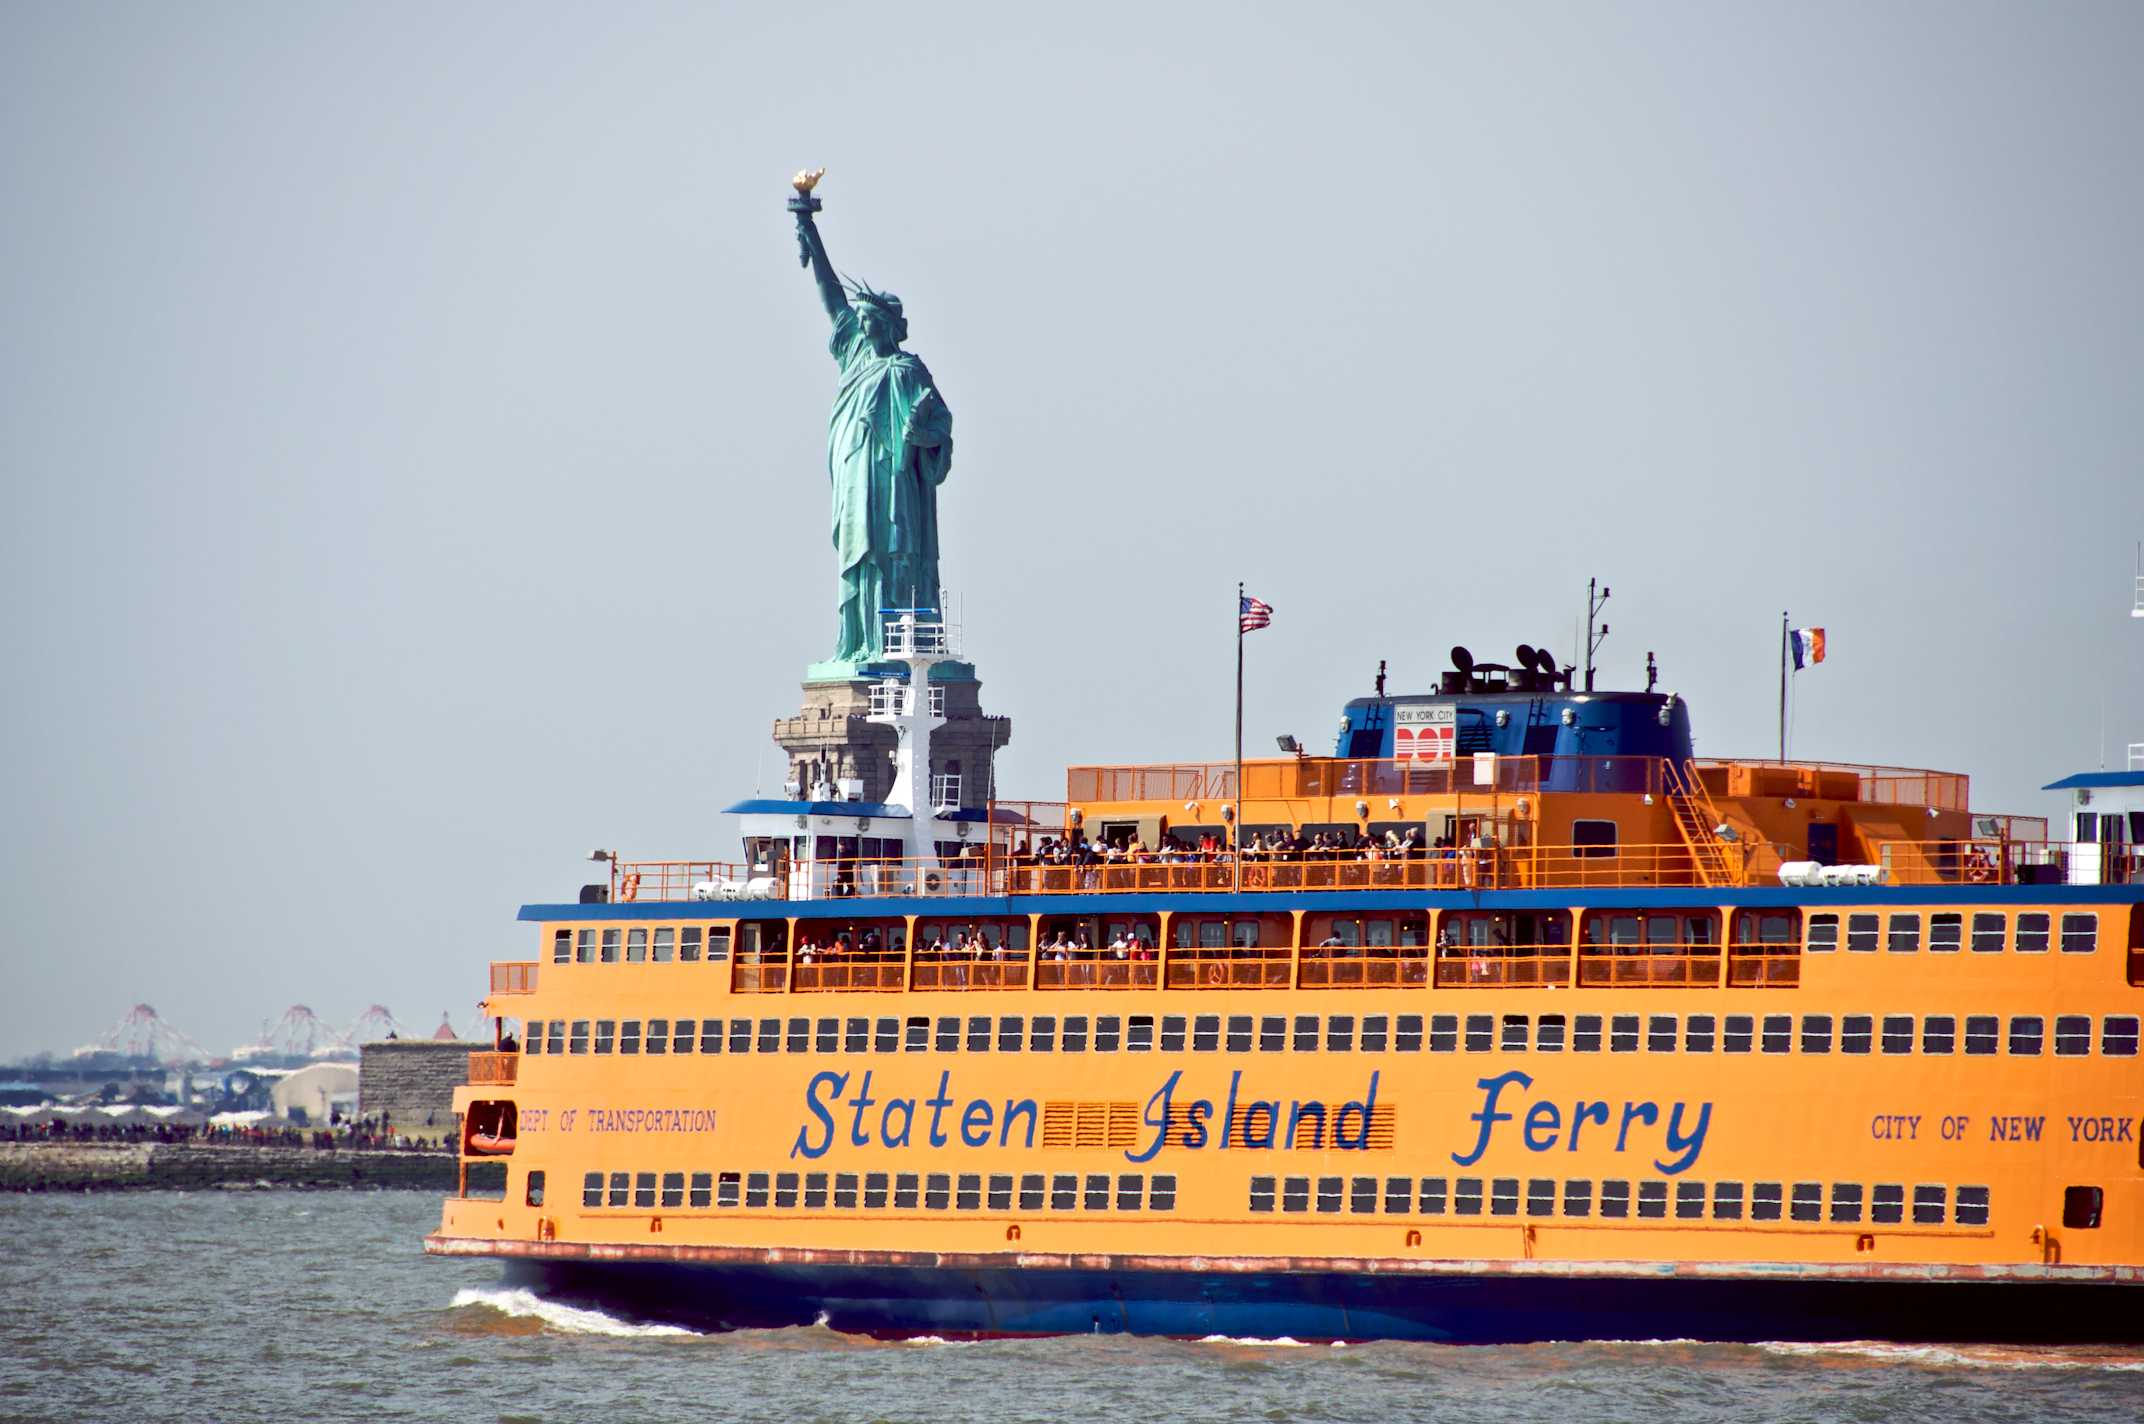 Staten Island Ferry with Statue of Liberty behind it